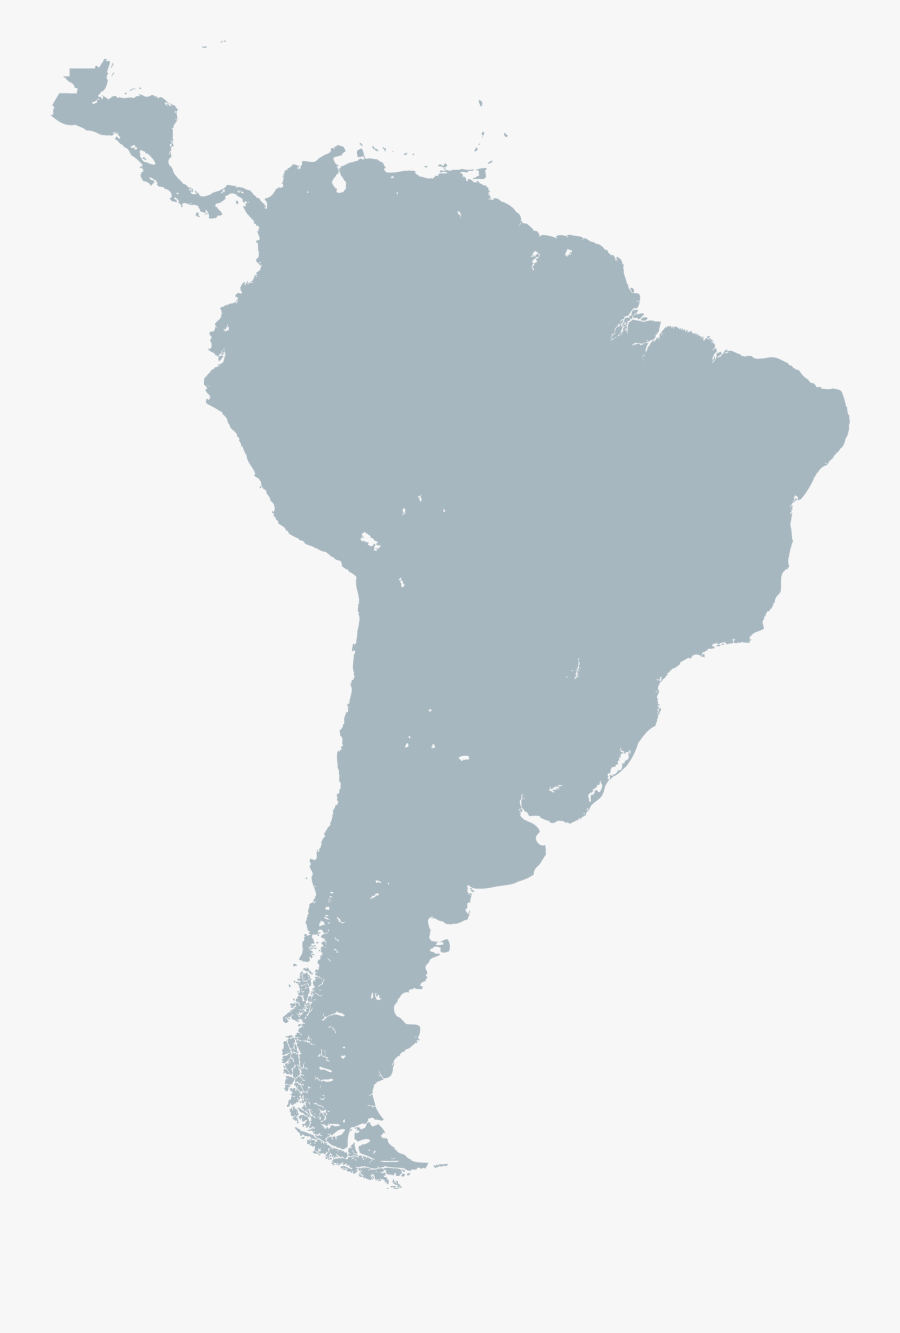 South America Map Png, Transparent Clipart